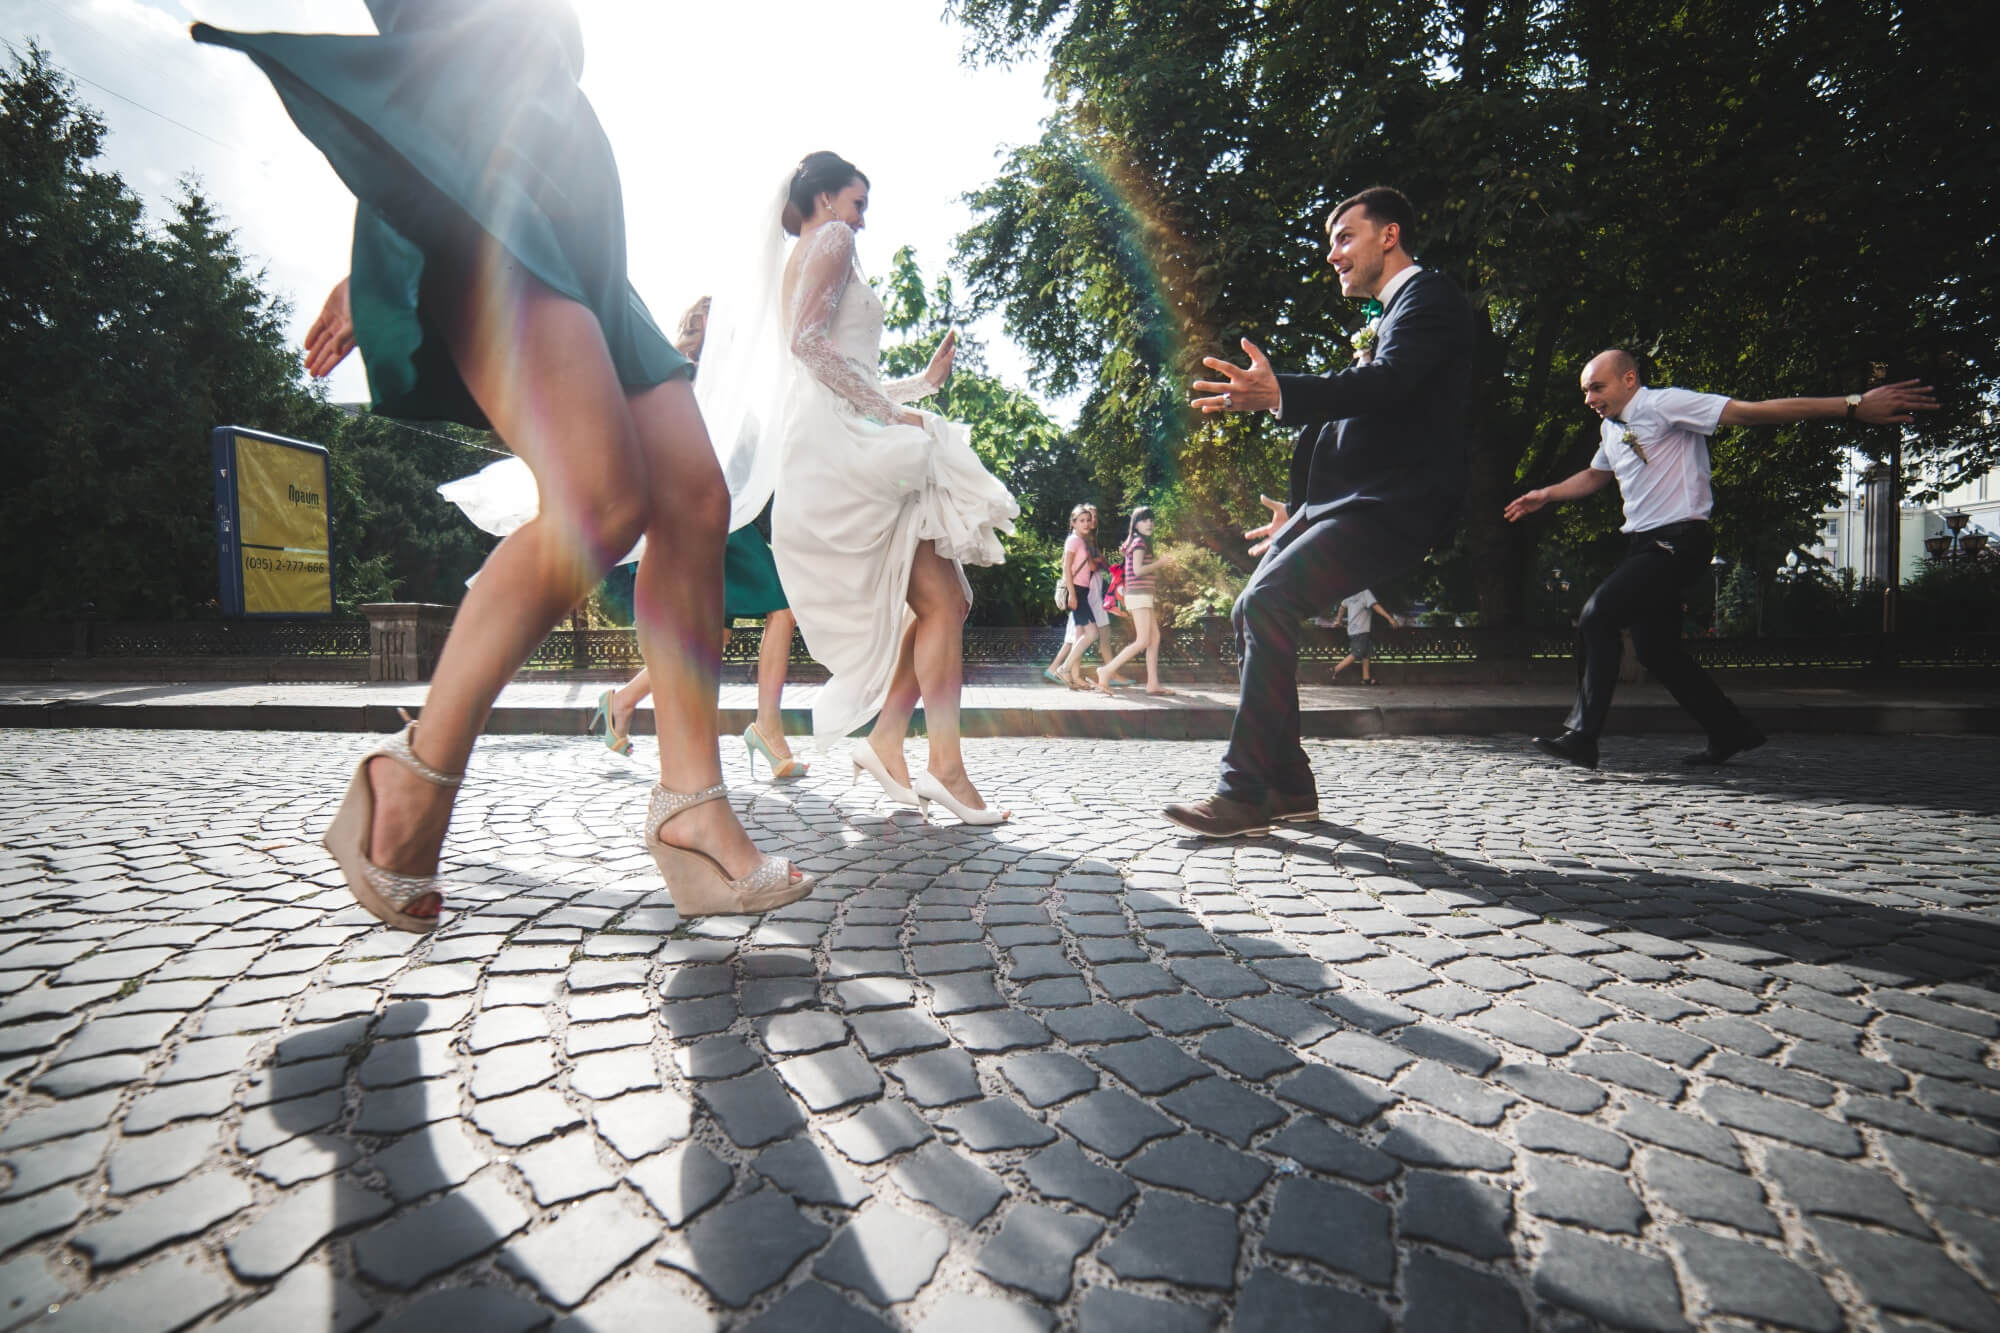 Think-outside-the-box-Wedding-ideas-for-entertainment-dancing